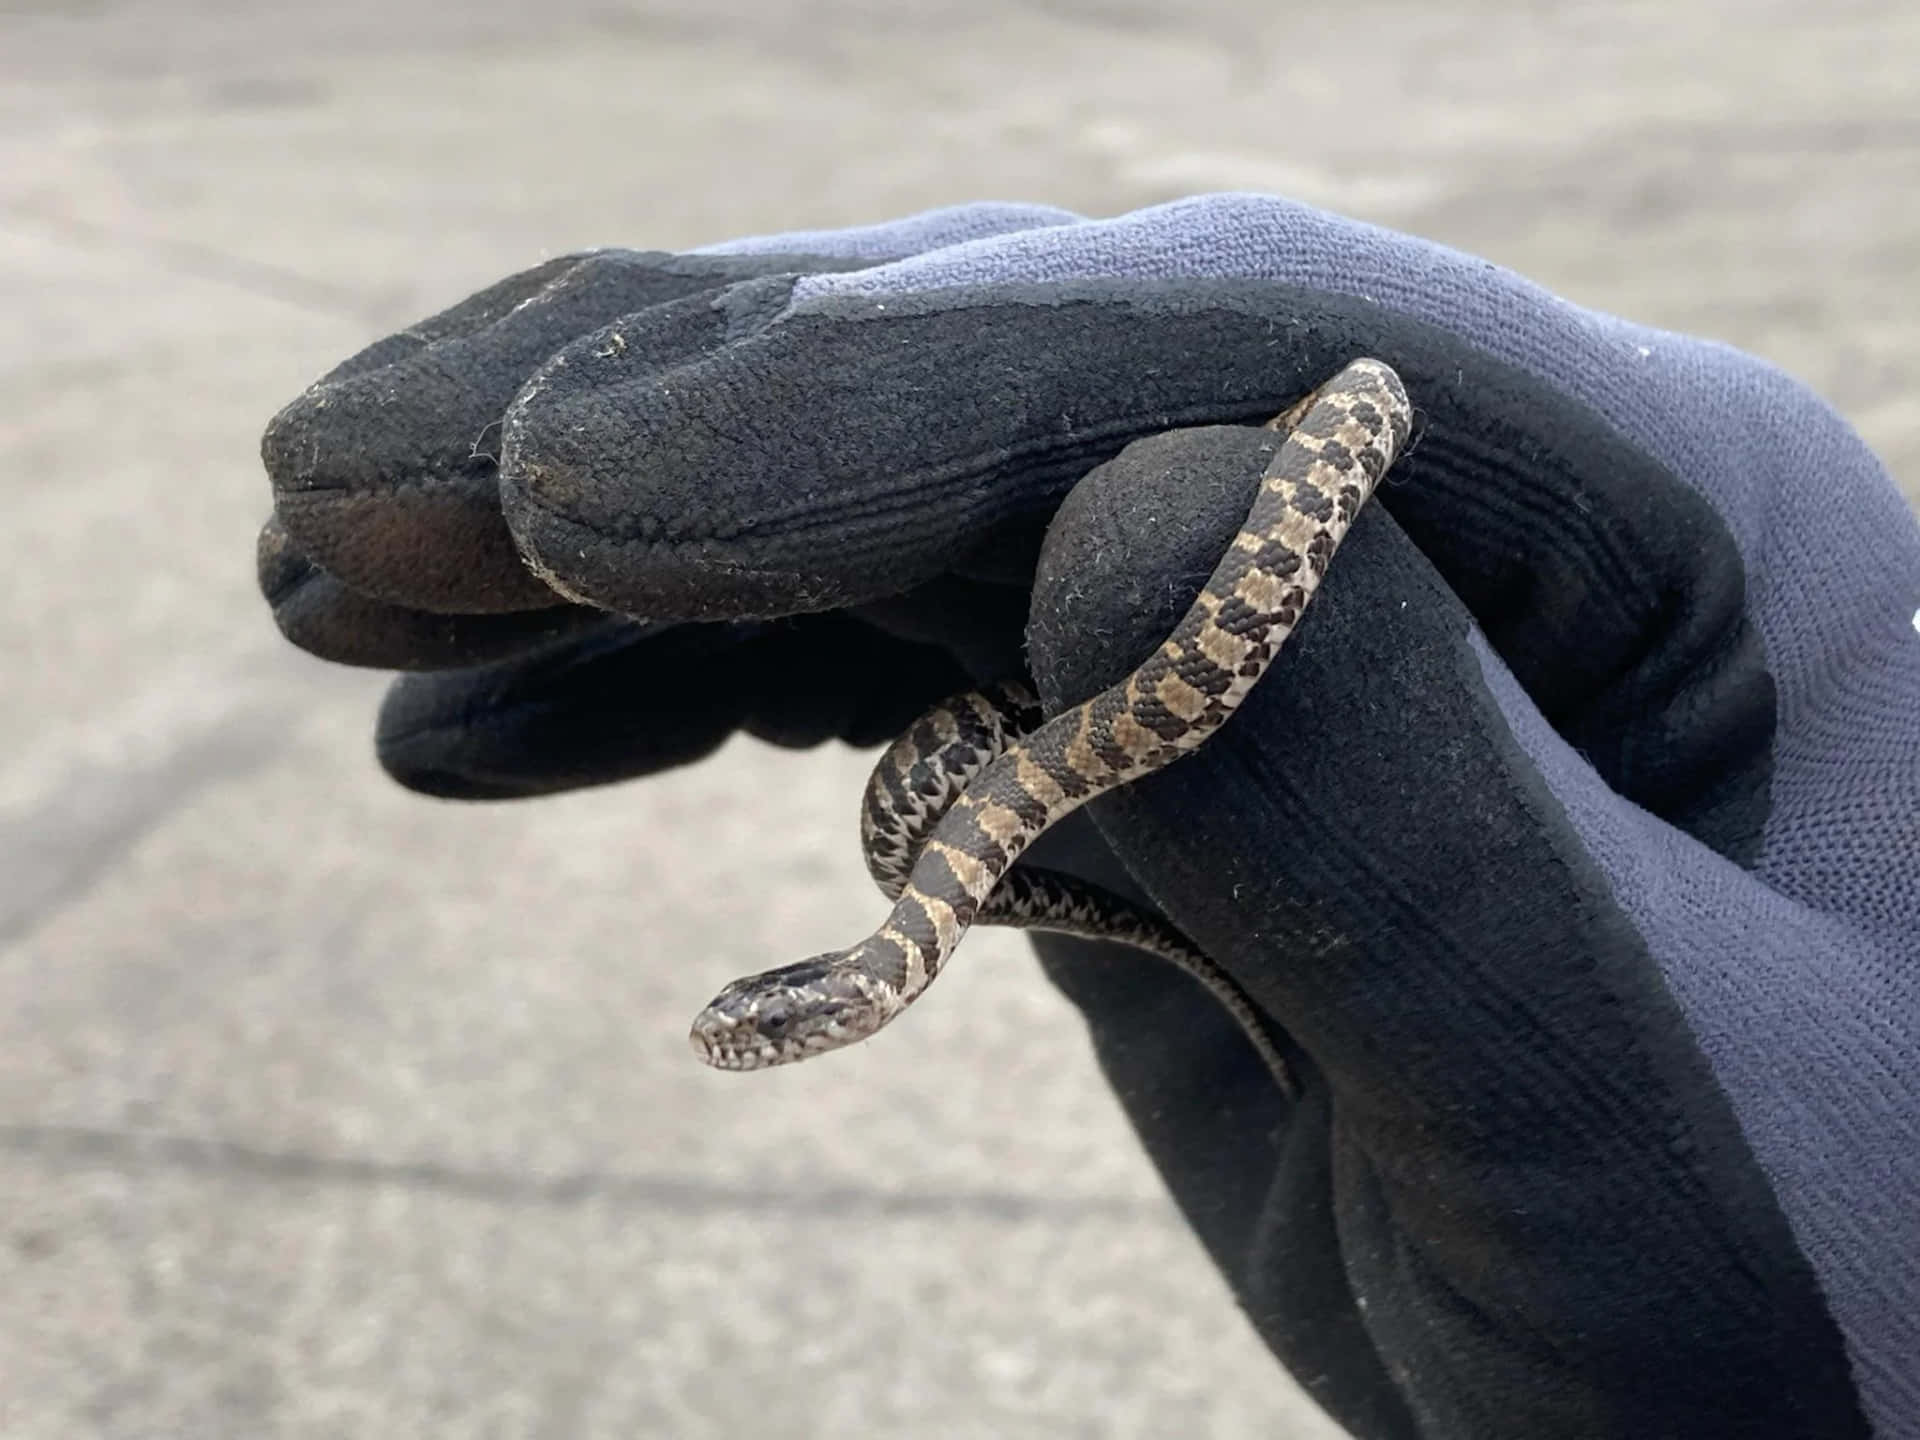 A Small Snake Is Being Held In A Person's Glove